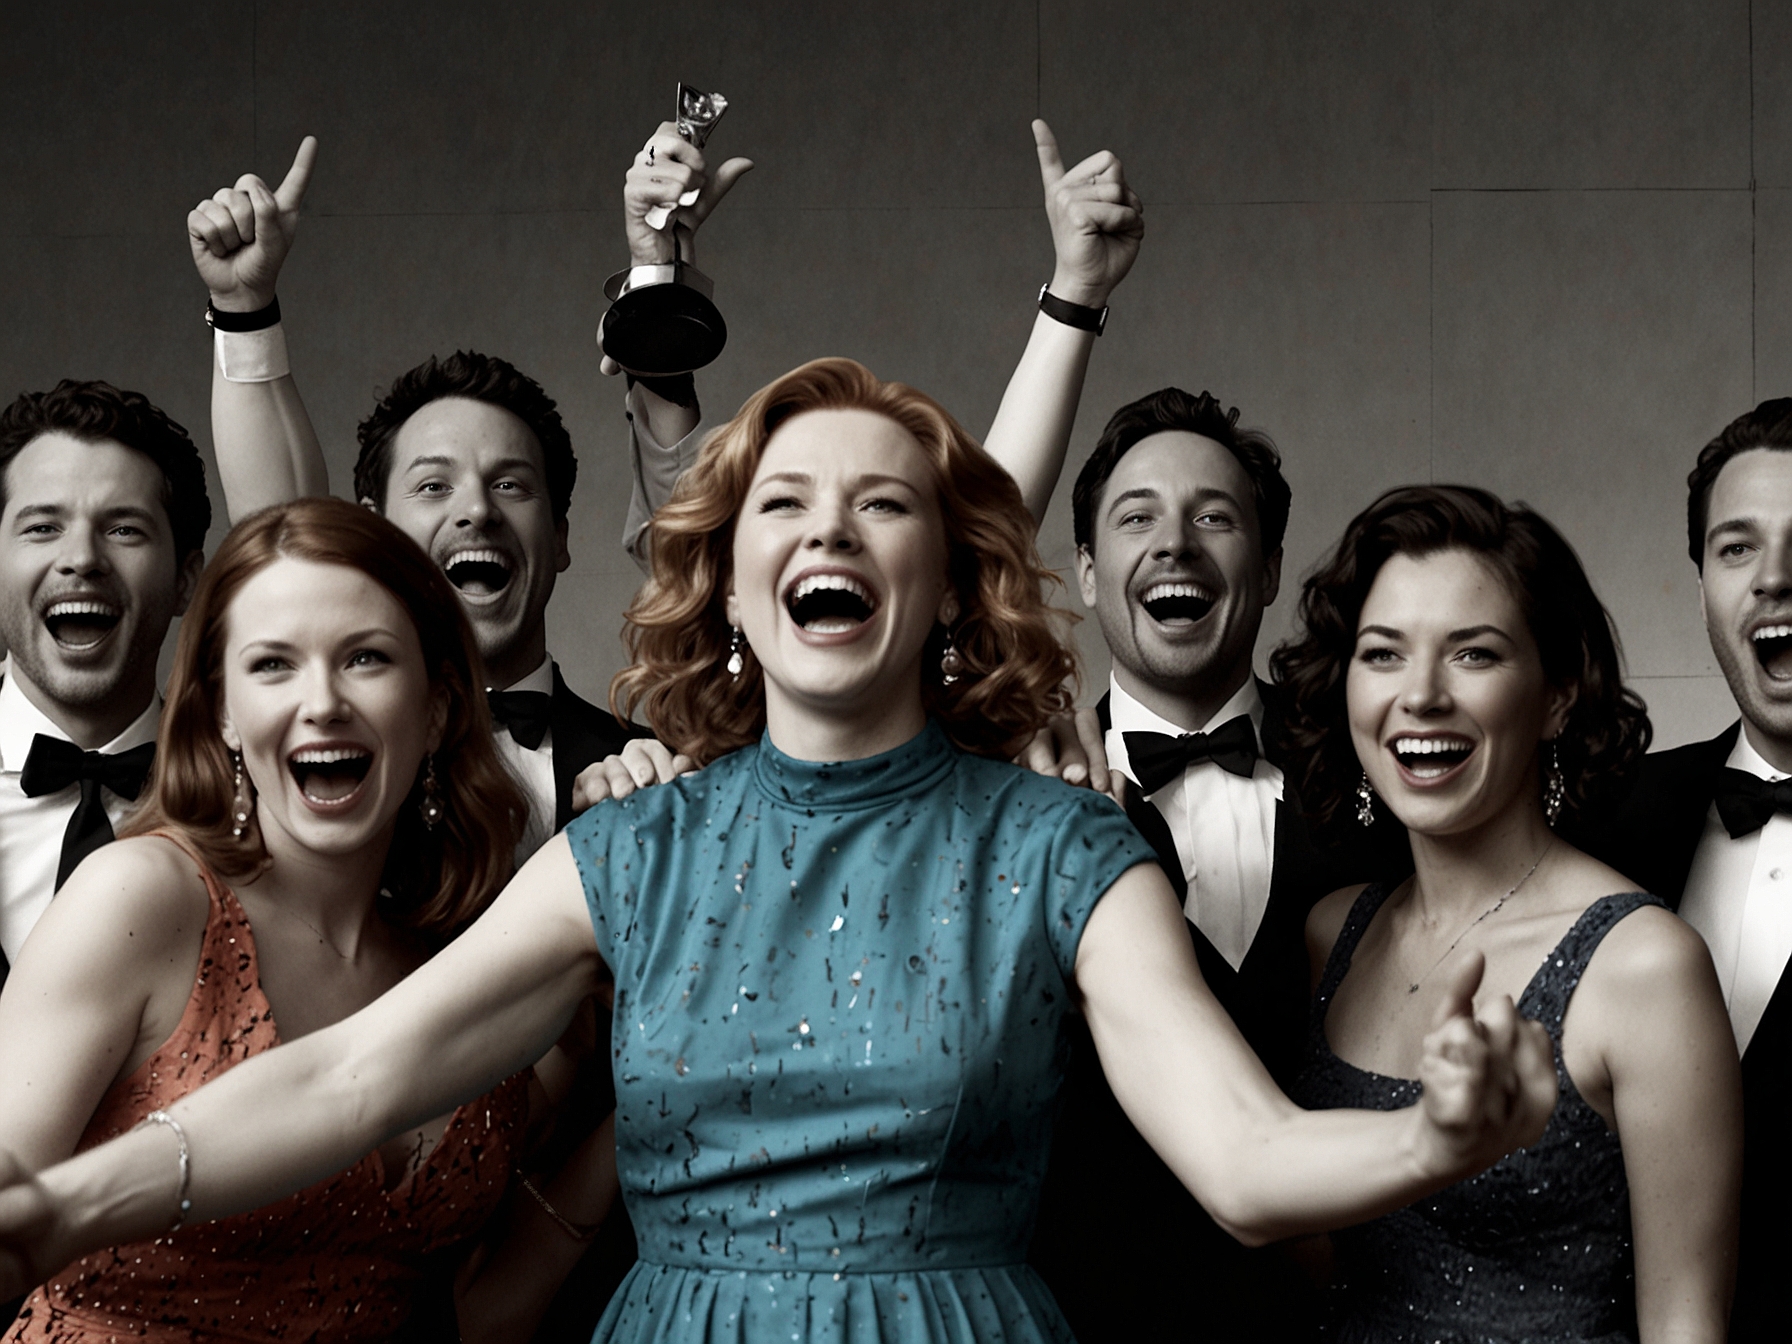 The cast of 'Stereophonic' celebrates on stage after winning the Tony Award for Best New Play, showcasing their elation and camaraderie.